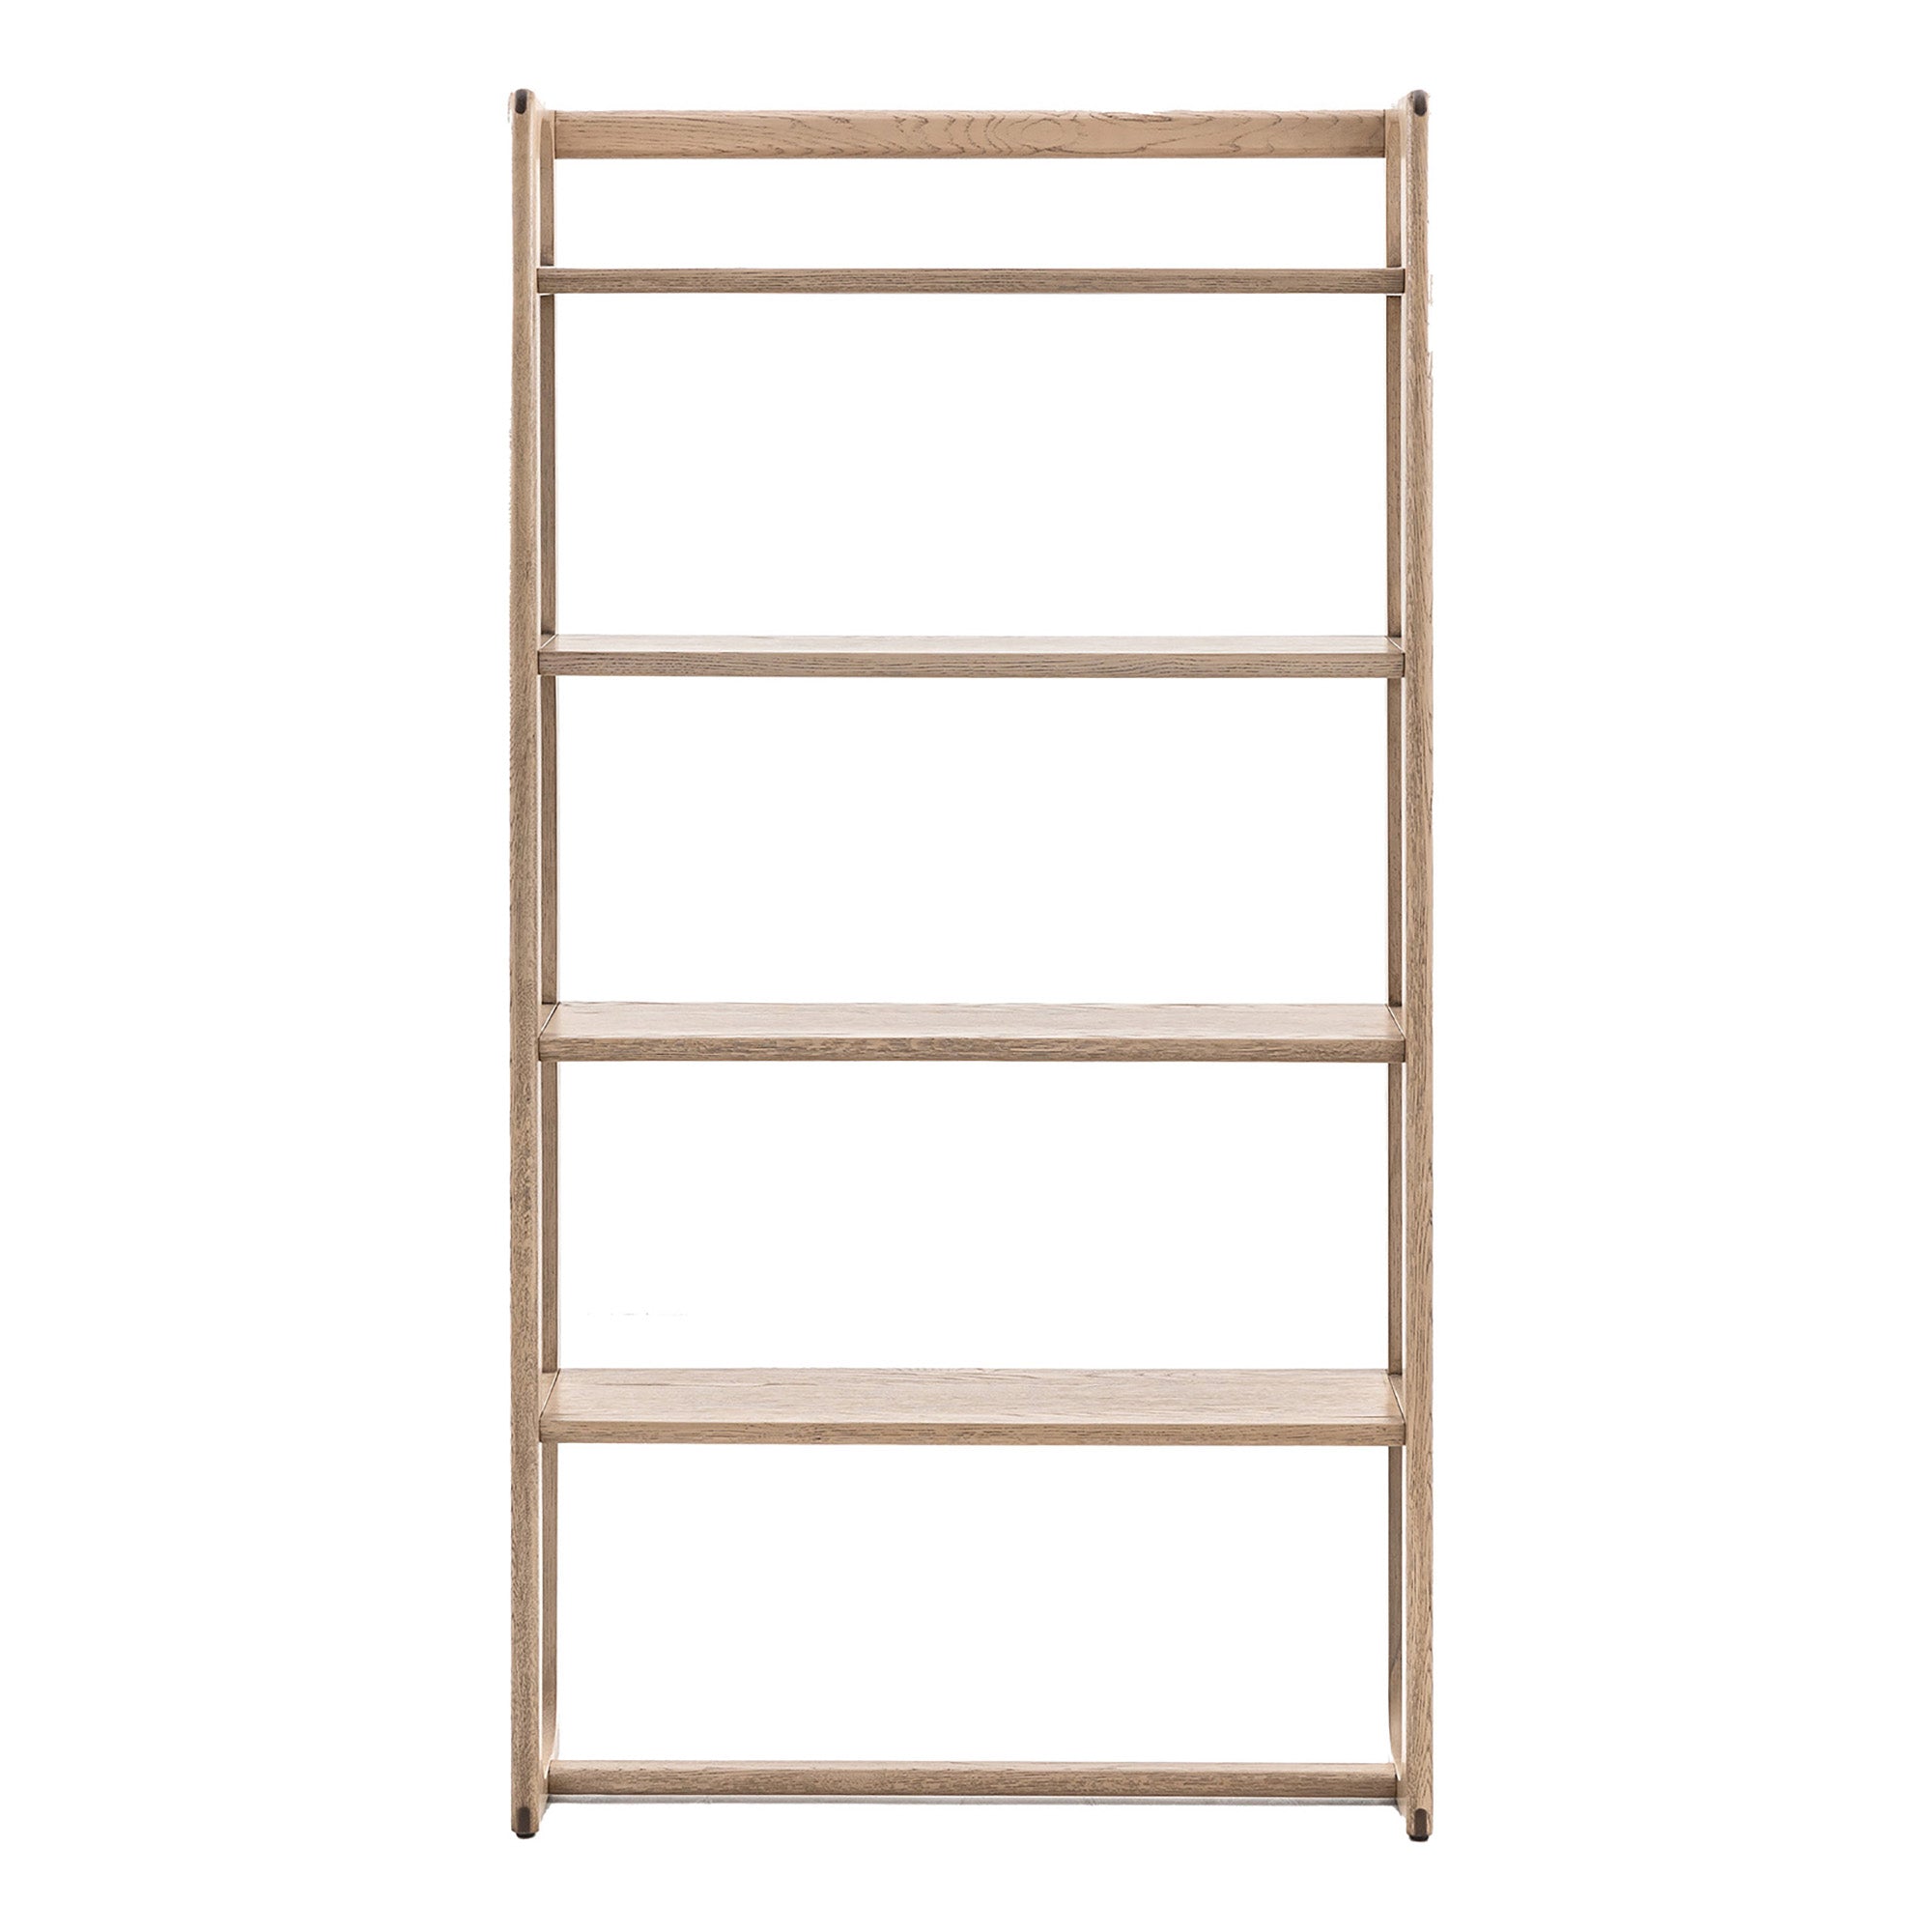 The Finest Wooden Shelving Unit